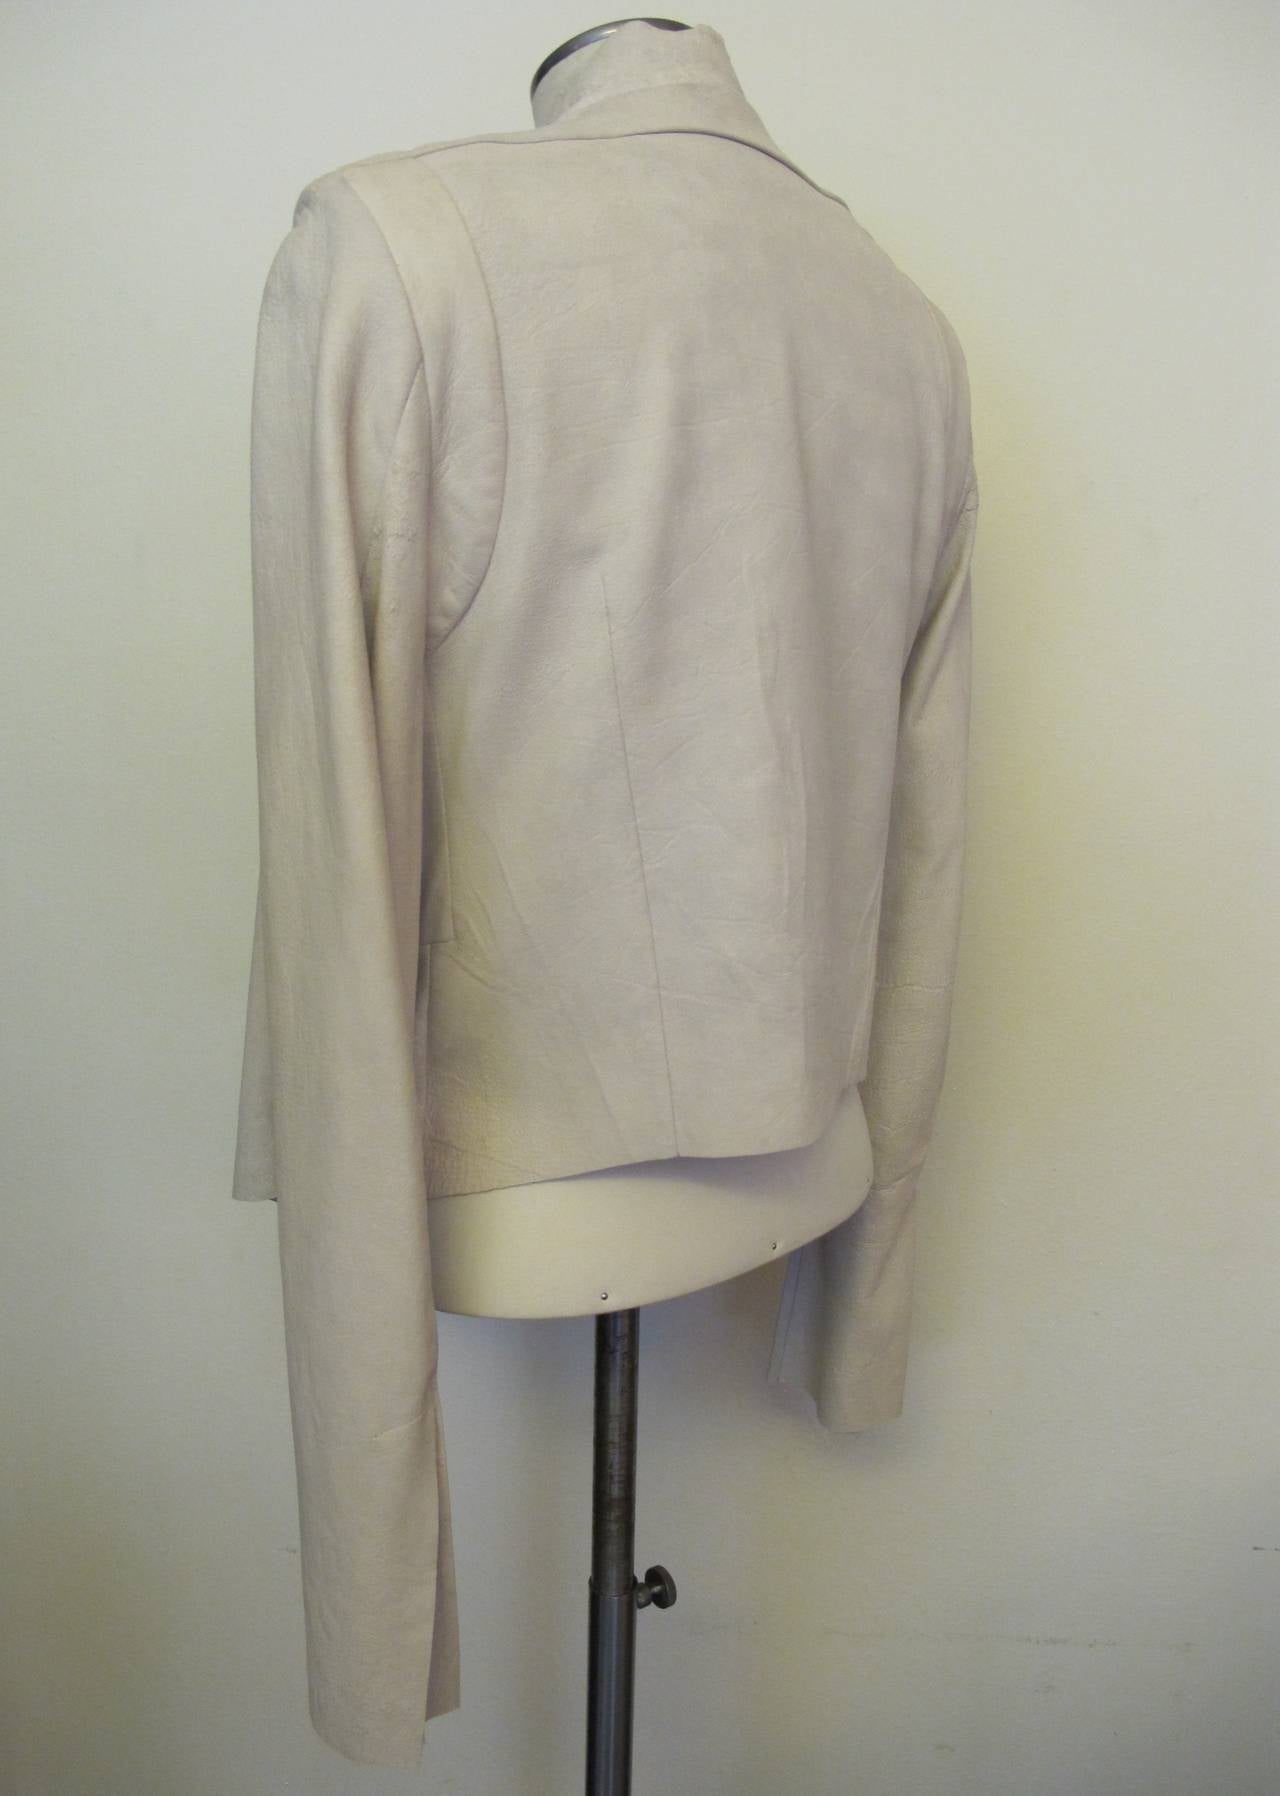 Rick Owens Light Sand Sheep Leather Asymmetrical Jacket In Excellent Condition For Sale In San Francisco, CA